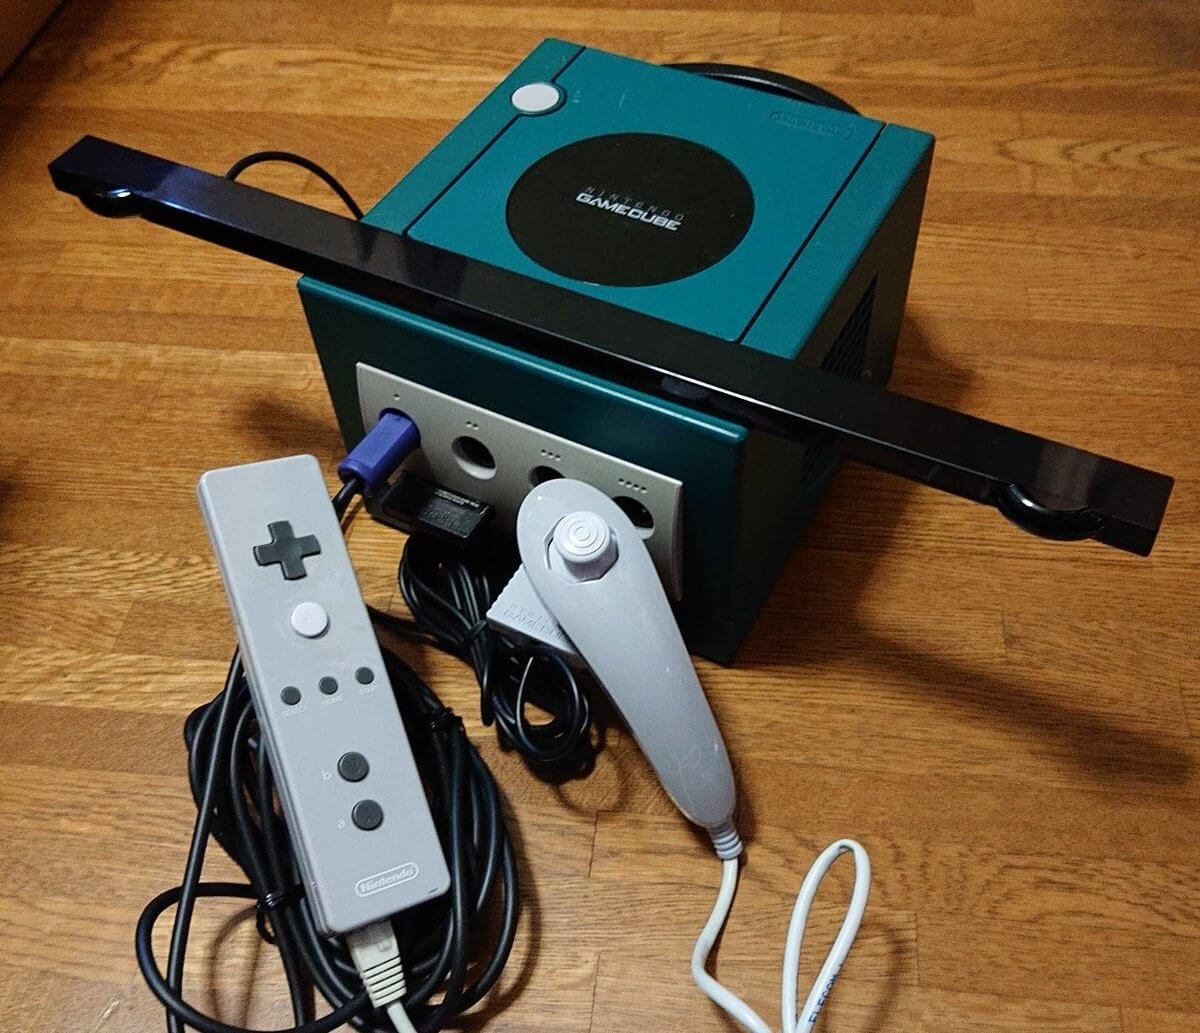 Nintendo WiiMote prototype that connects to GameCube sells at auction